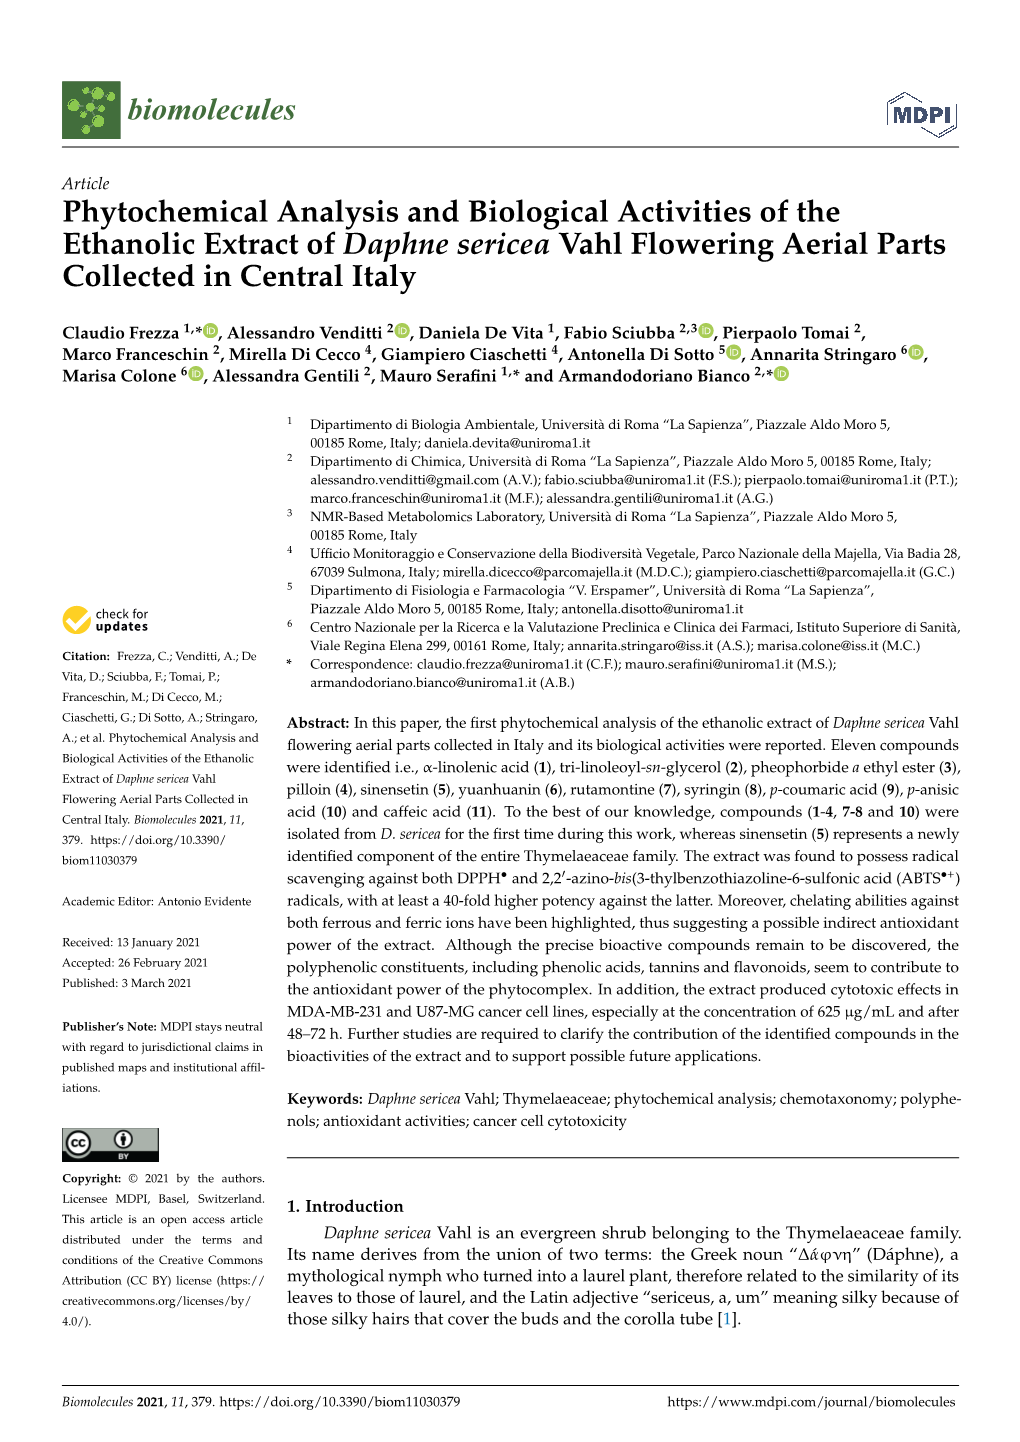 Phytochemical Analysis and Biological Activities of the Ethanolic Extract of Daphne Sericea Vahl Flowering Aerial Parts Collected in Central Italy